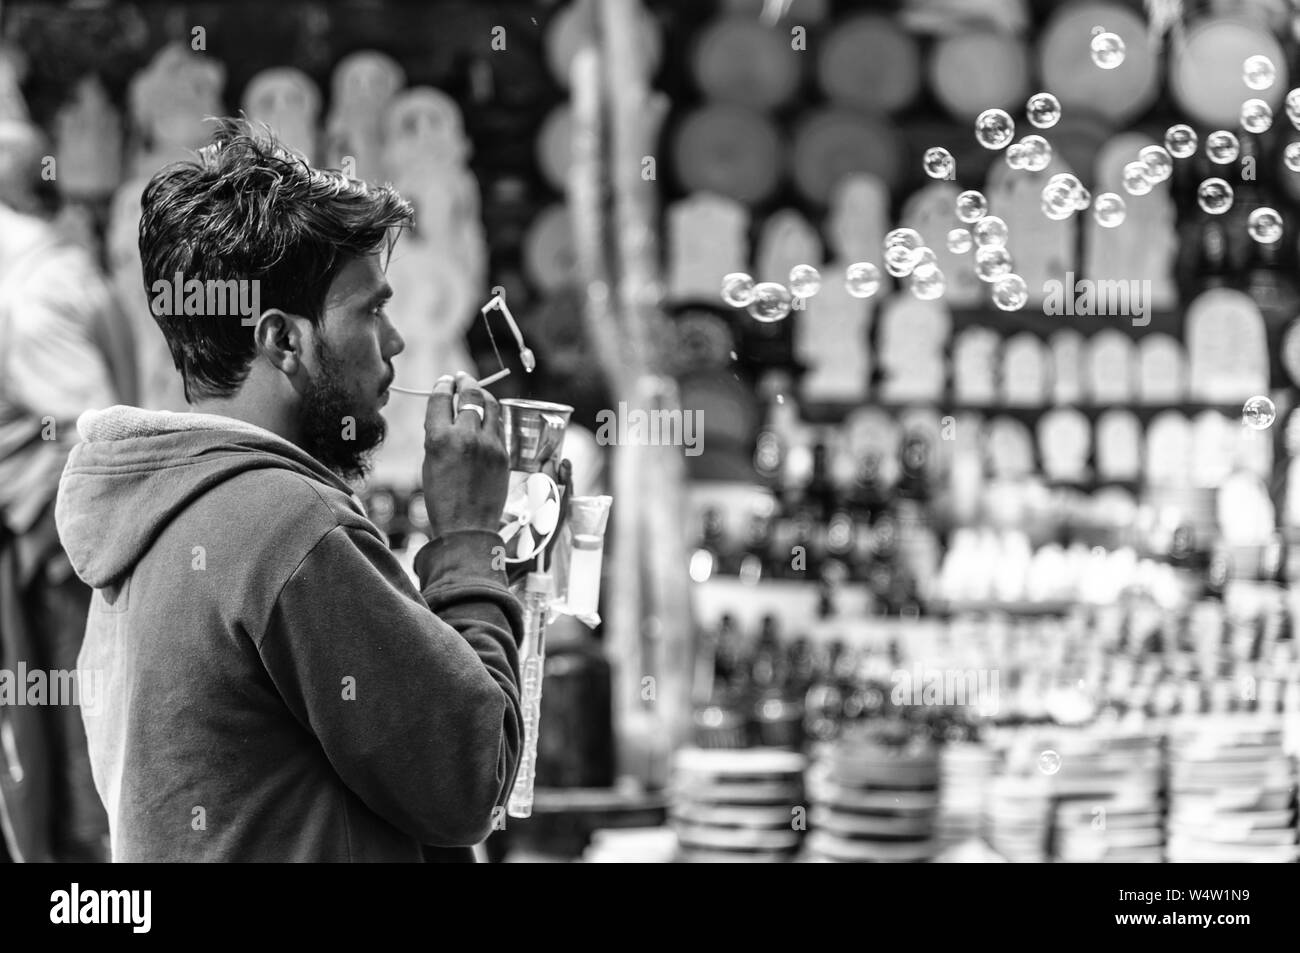 An unidentified Rural Indian salesman Blowing and selling Soap Bubbles with Bubble blower. Stock Photo